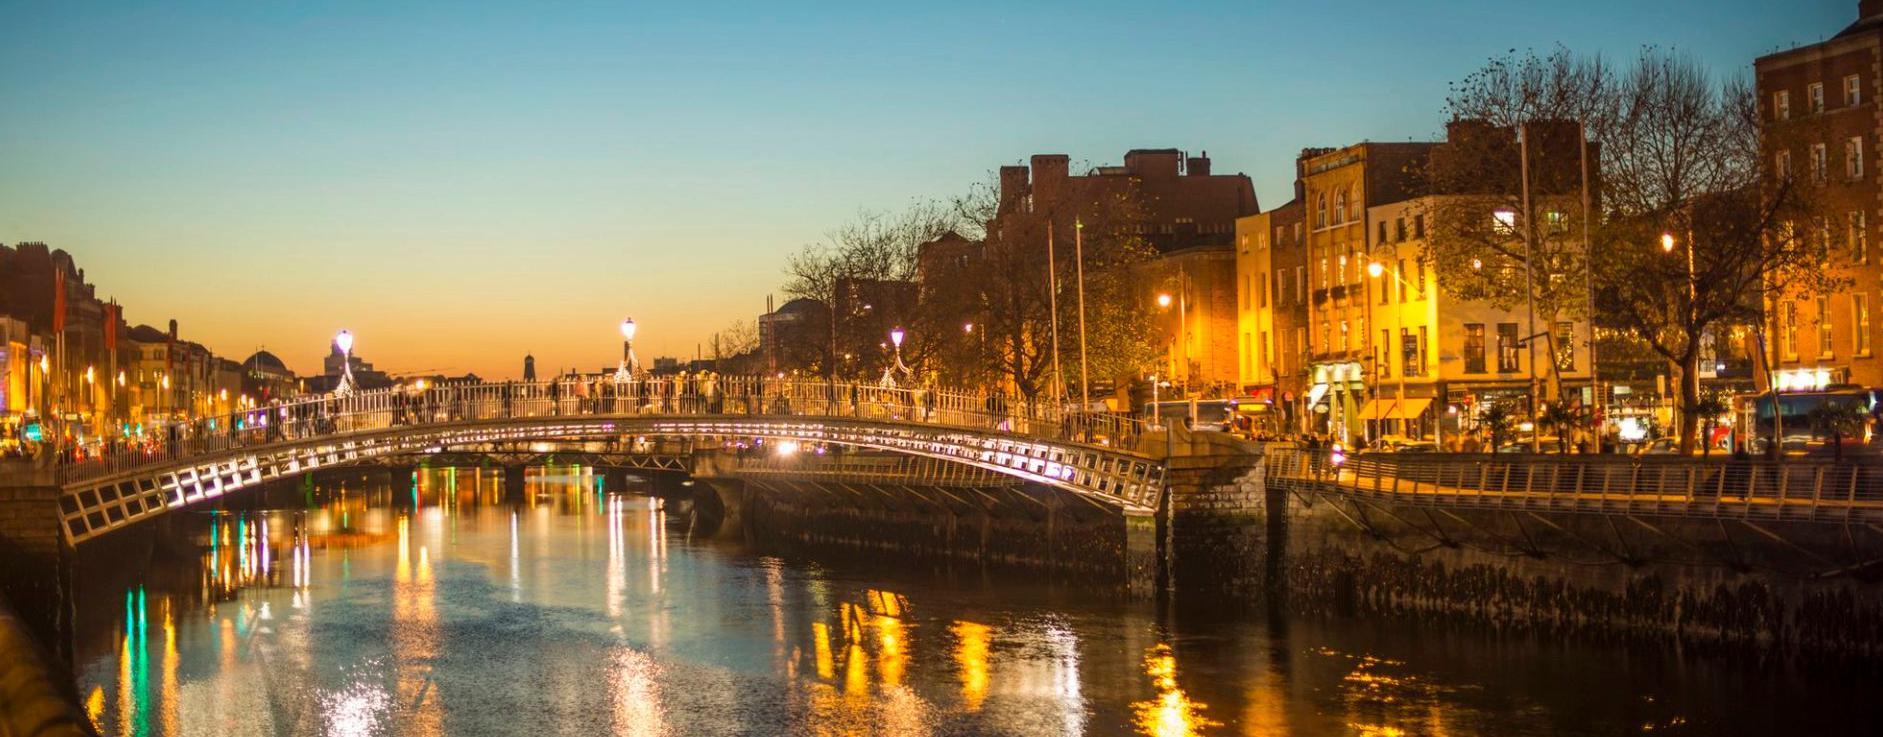 Night view of Dublin with the Hapenny across the Liffey